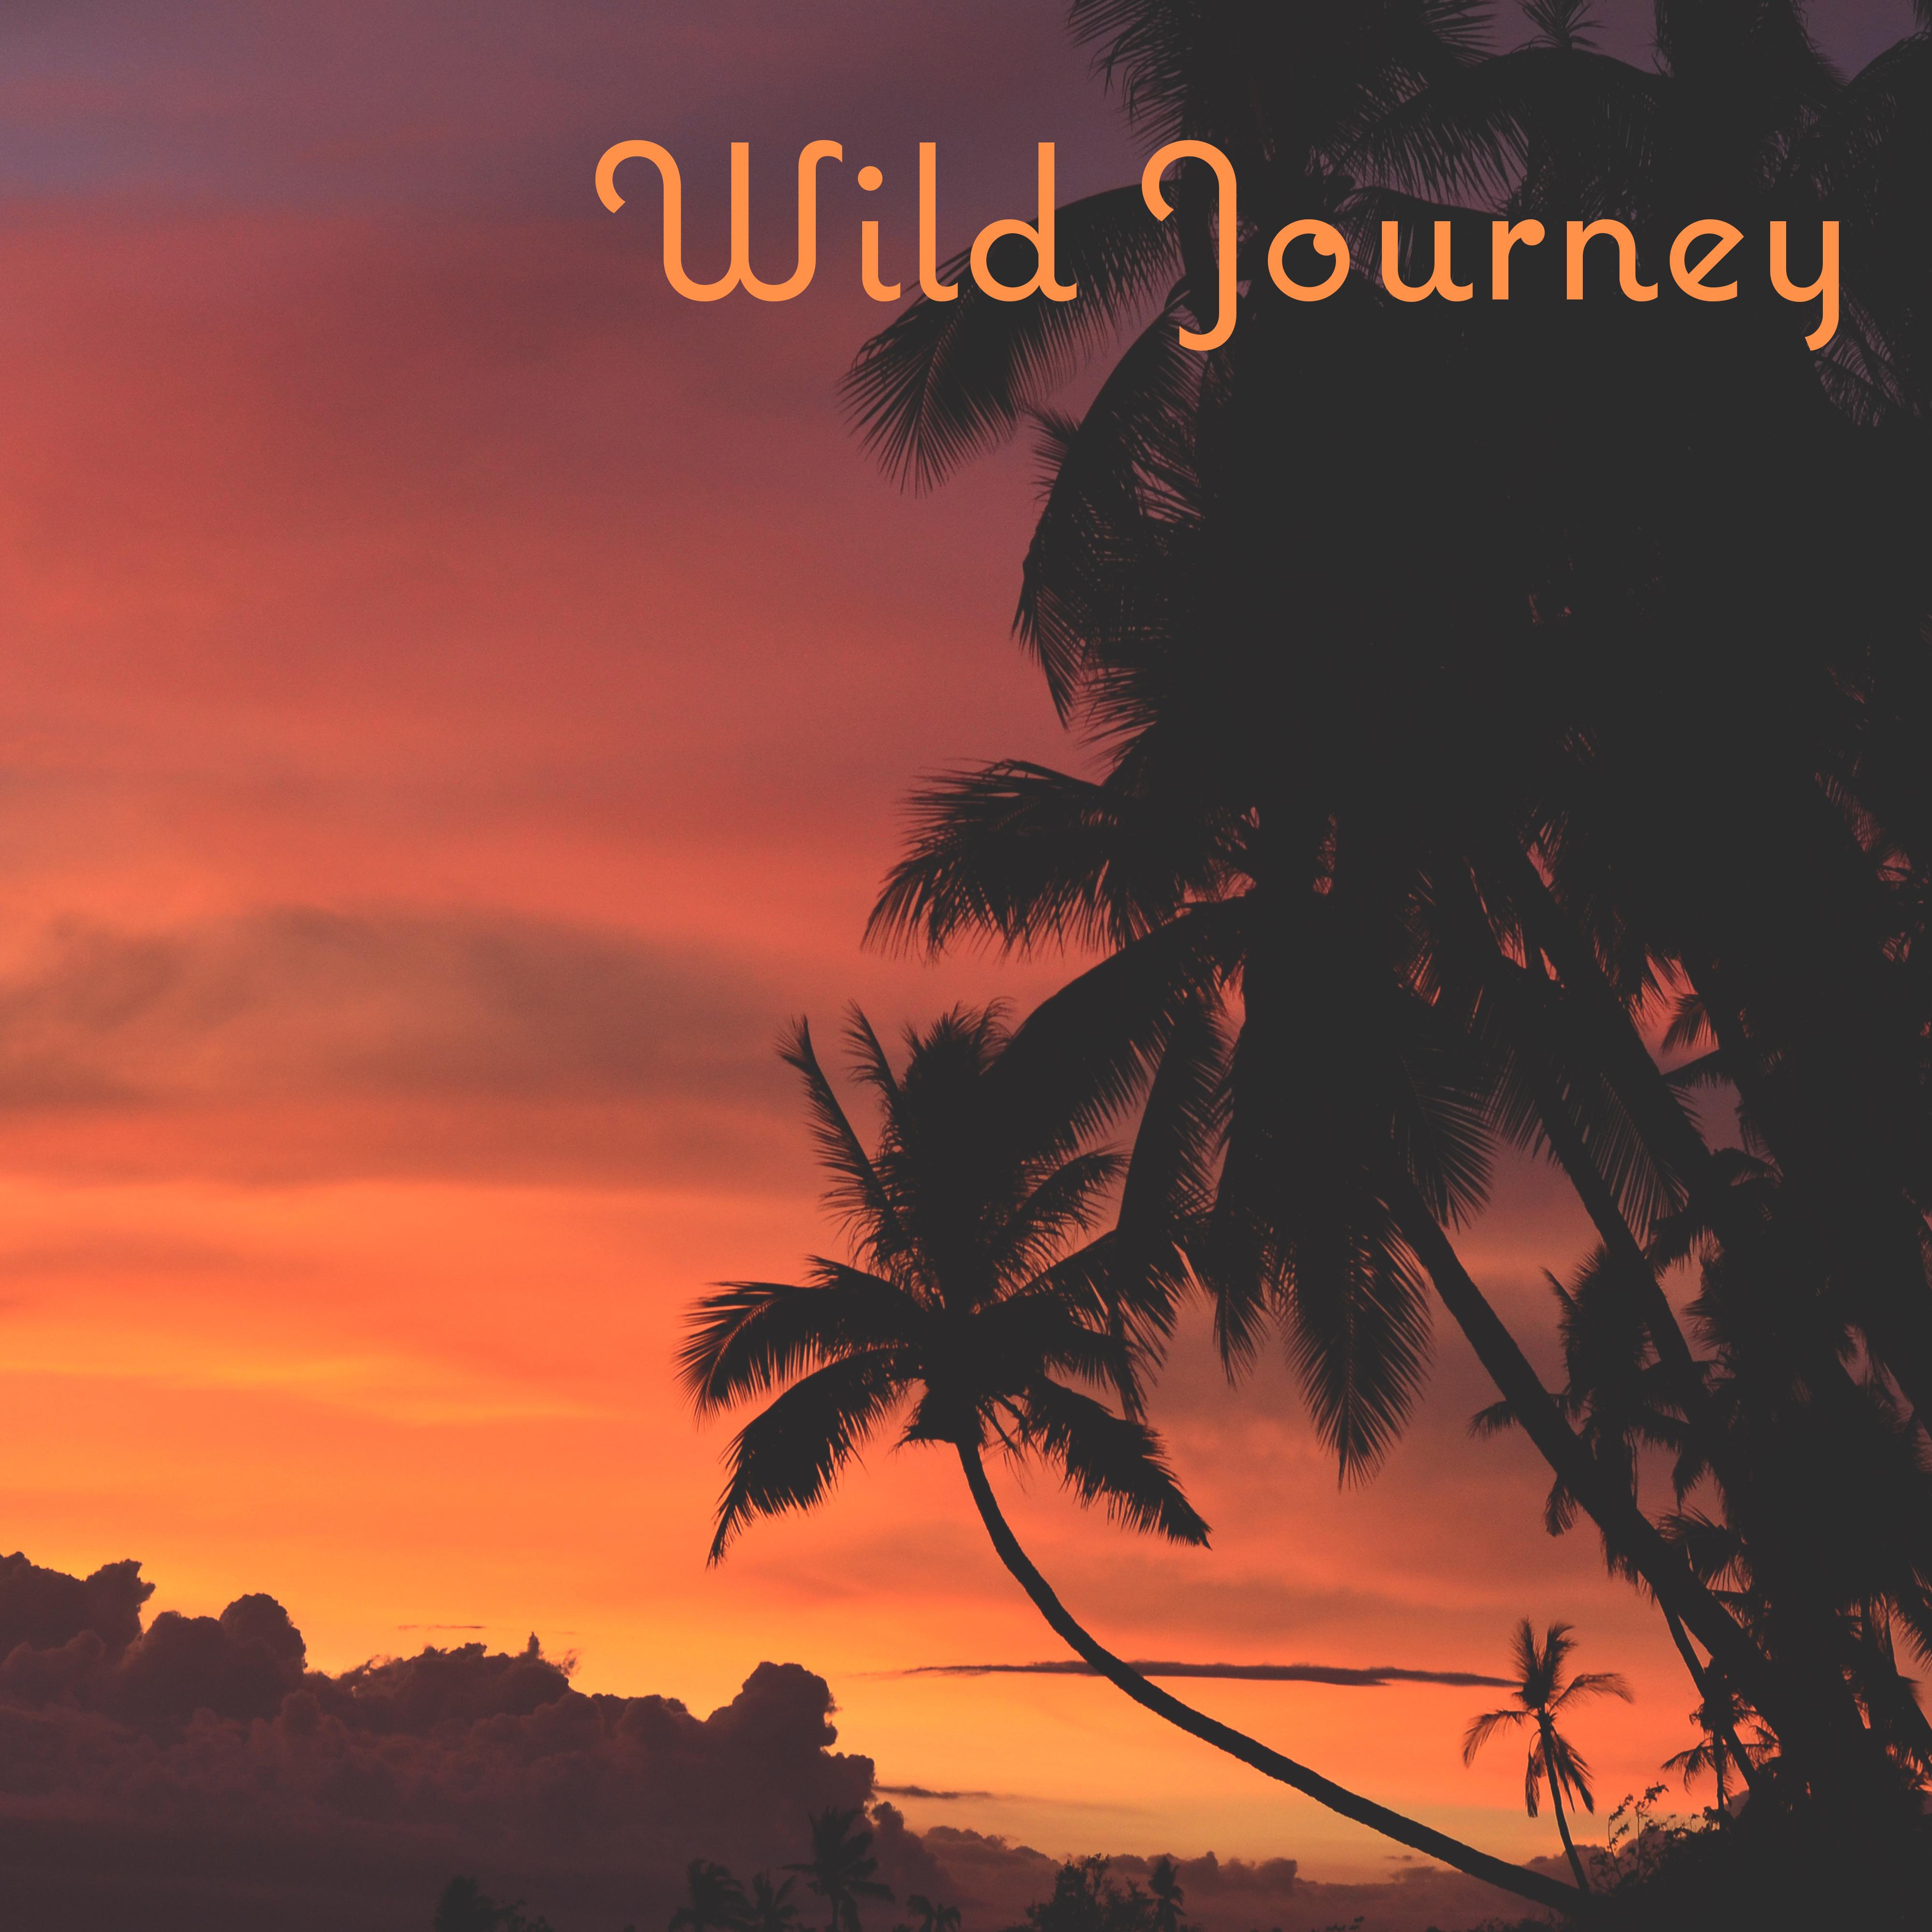 Wild Journey – Chillout Music, Hot Summertime, Total Relax, Positive Vibrations, Happy Chill